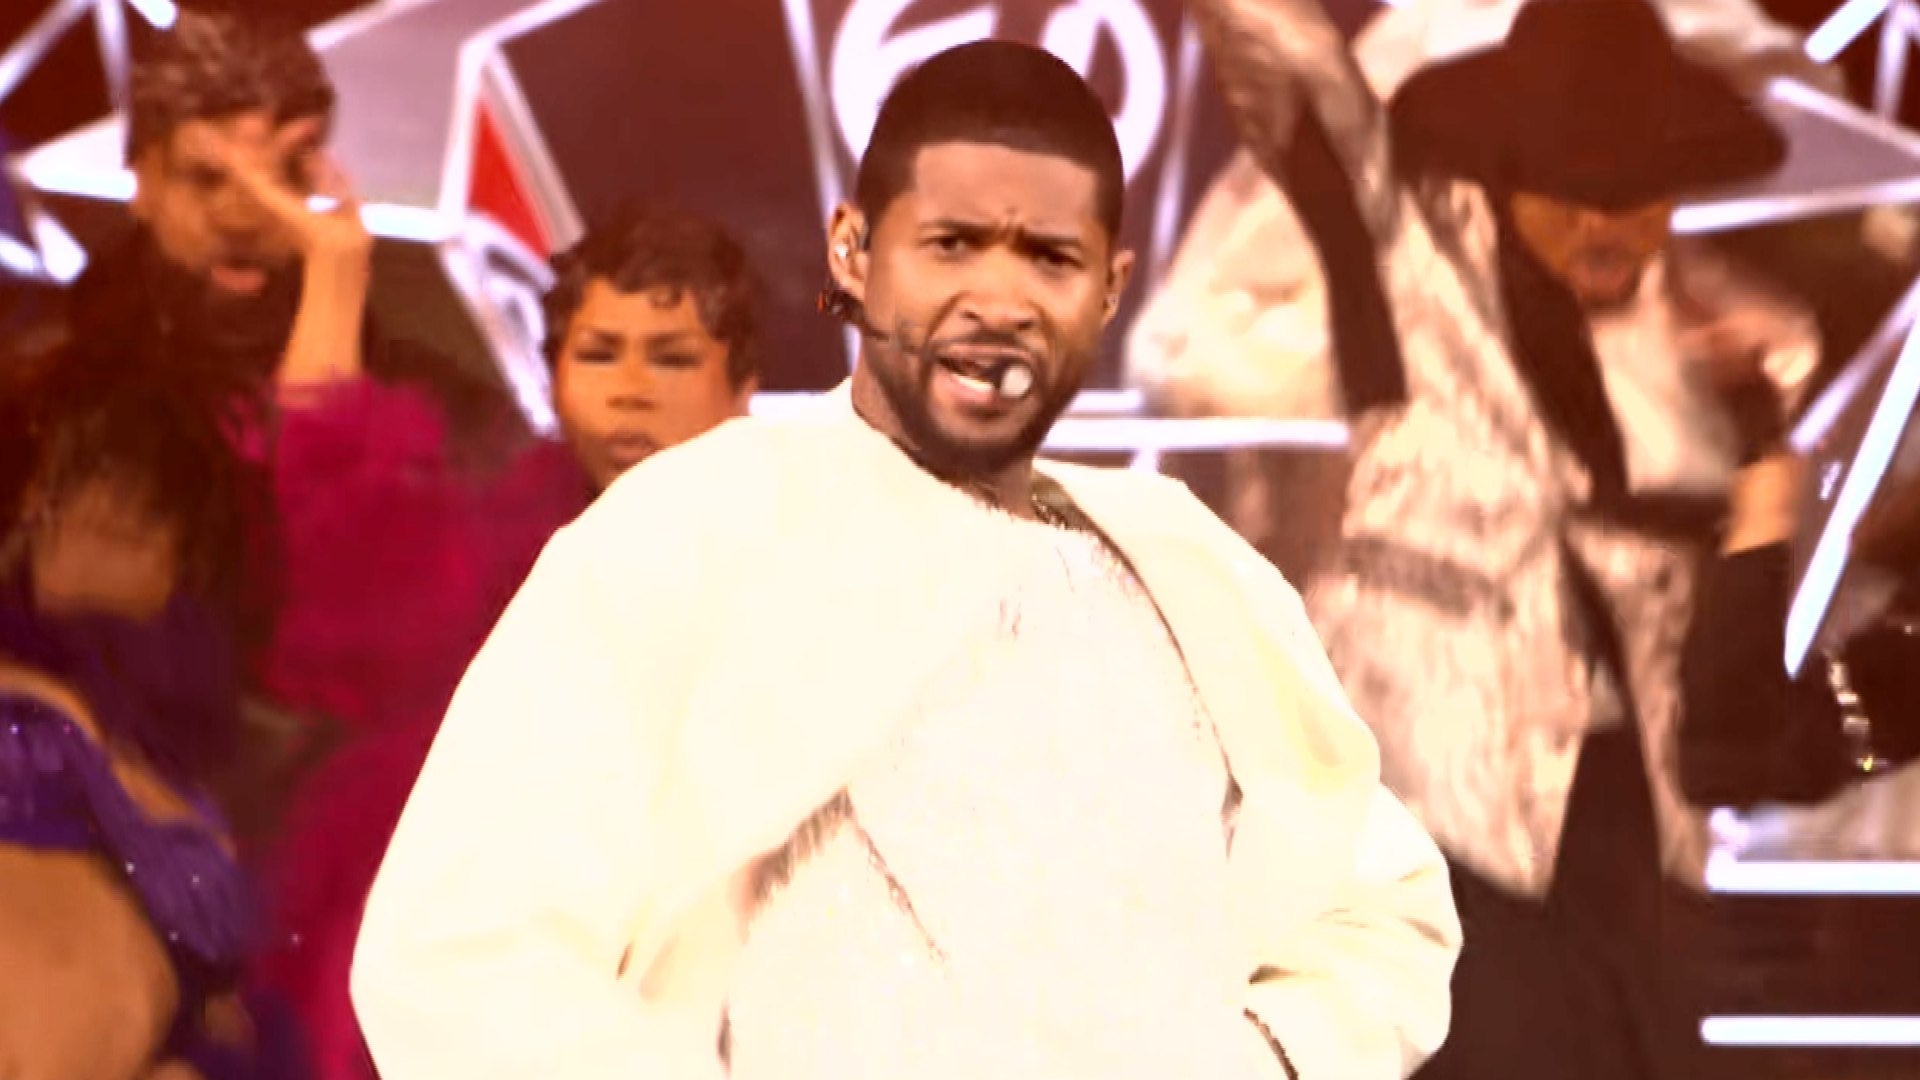 Usher Kicks Off Super Bowl Halftime Show With ‘Caught Up’ Performance